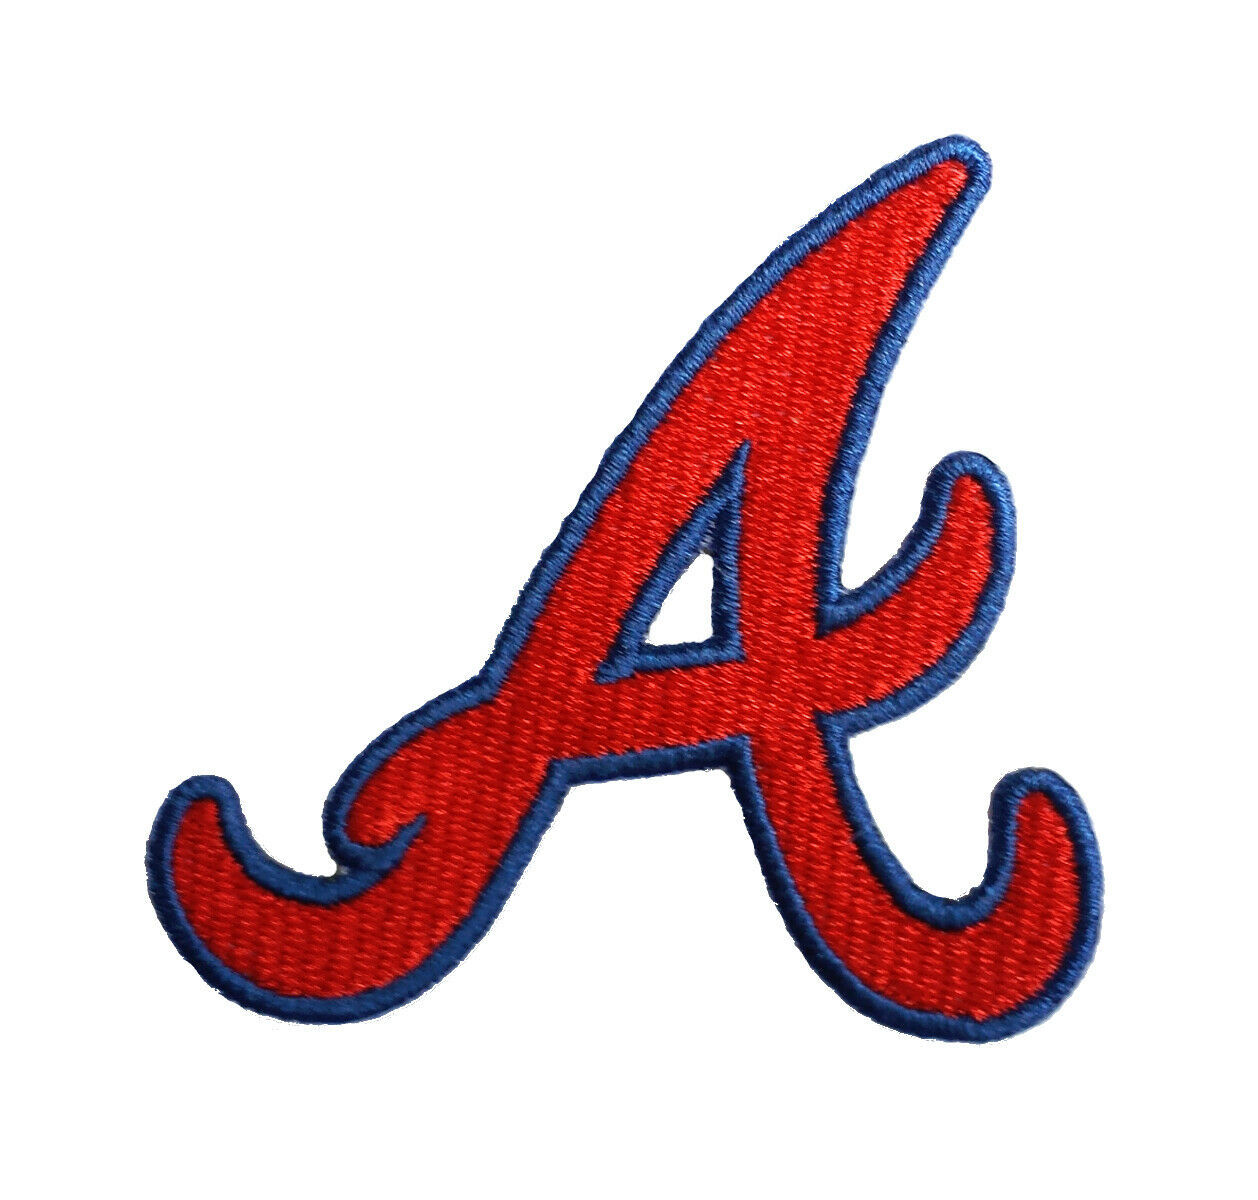 Primary image for Atlanta Braves "A" World Series MLB Baseball Embroidered Iron On Patch